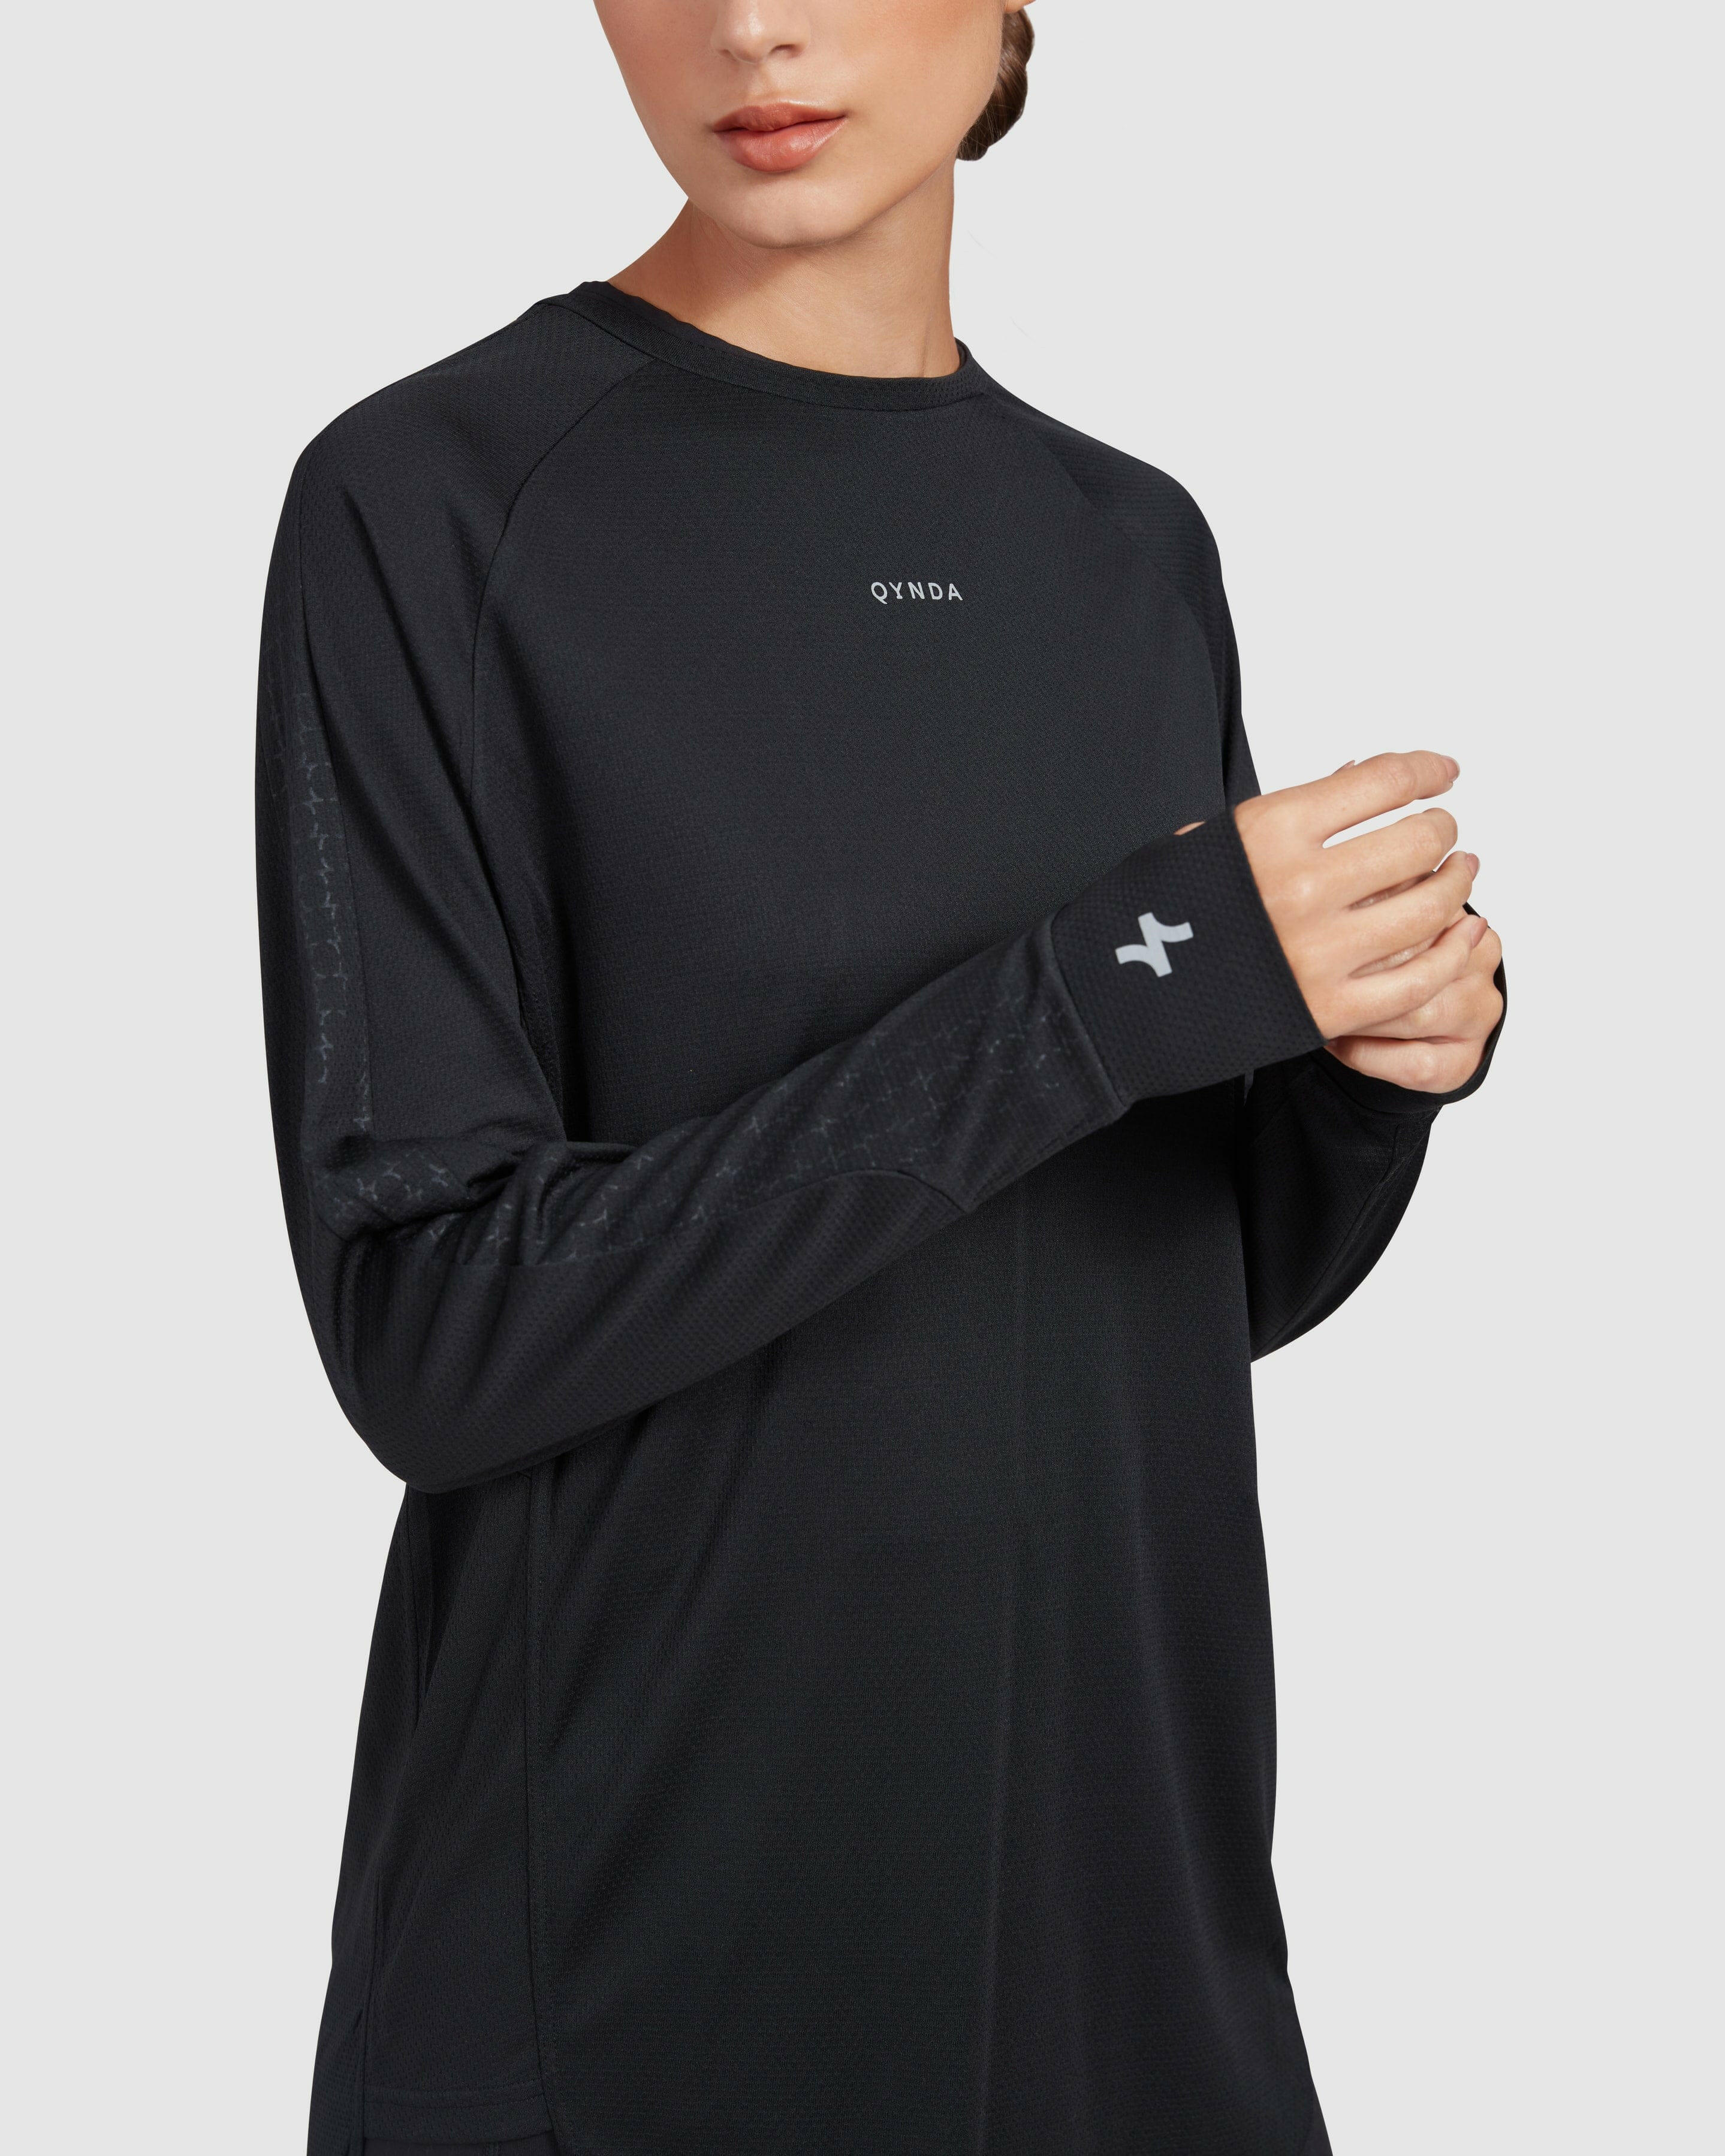 Close-up view of the stitching and fabric detail on a QYNDA active long sleeve t-shirt, showcasing the texture and design of the no see through material.